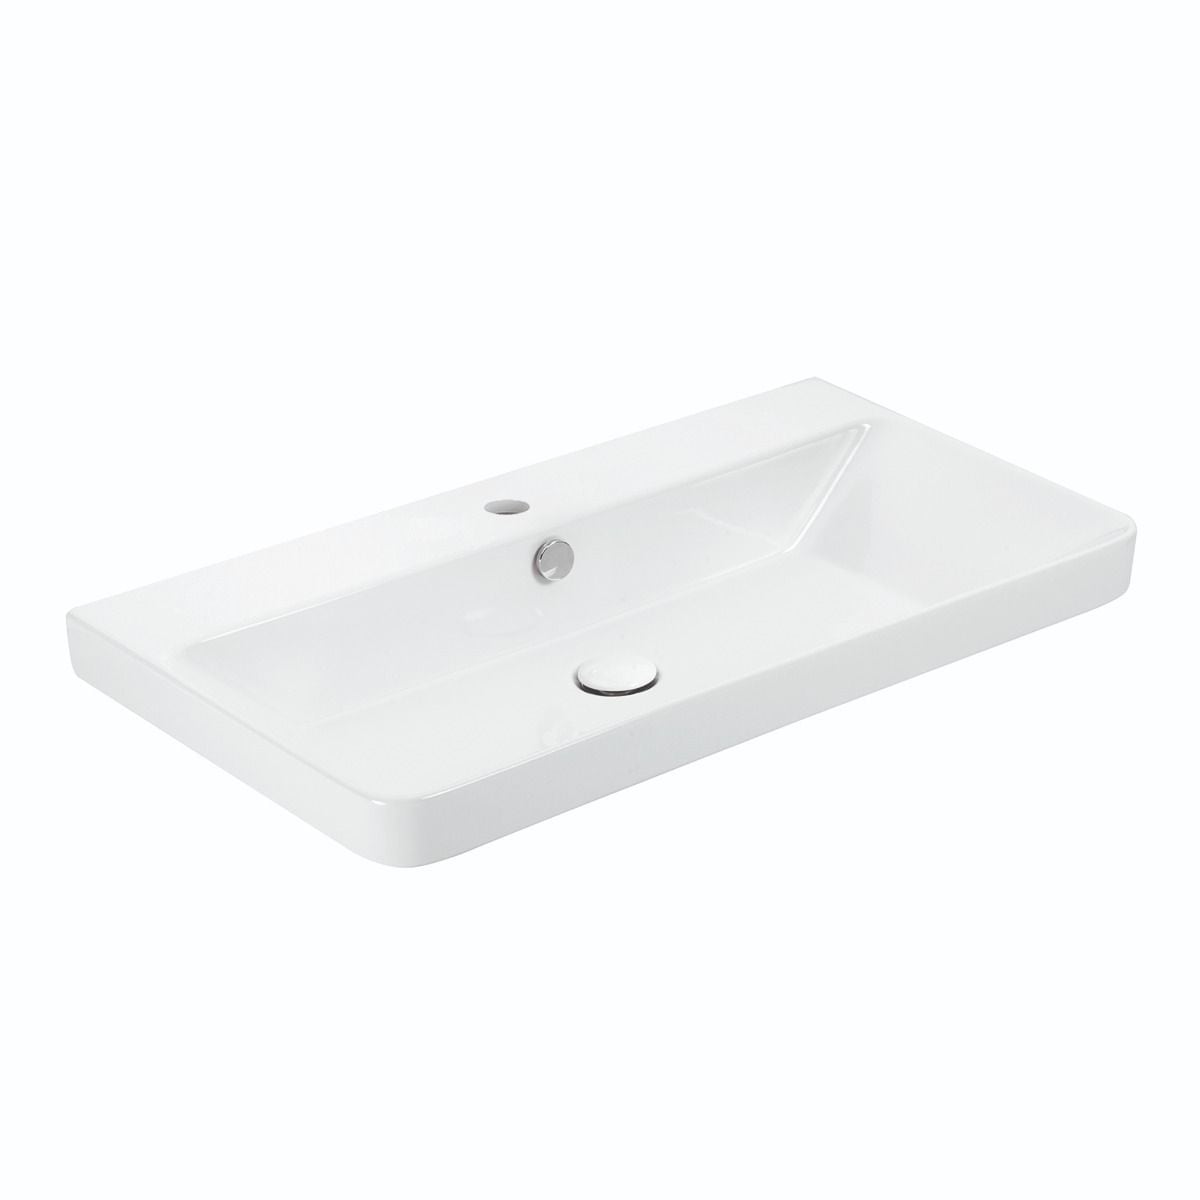 Voltaire Rectangular Ceramic Wall Hung Sink with Left Side Faucet Mount - White SM-WS315